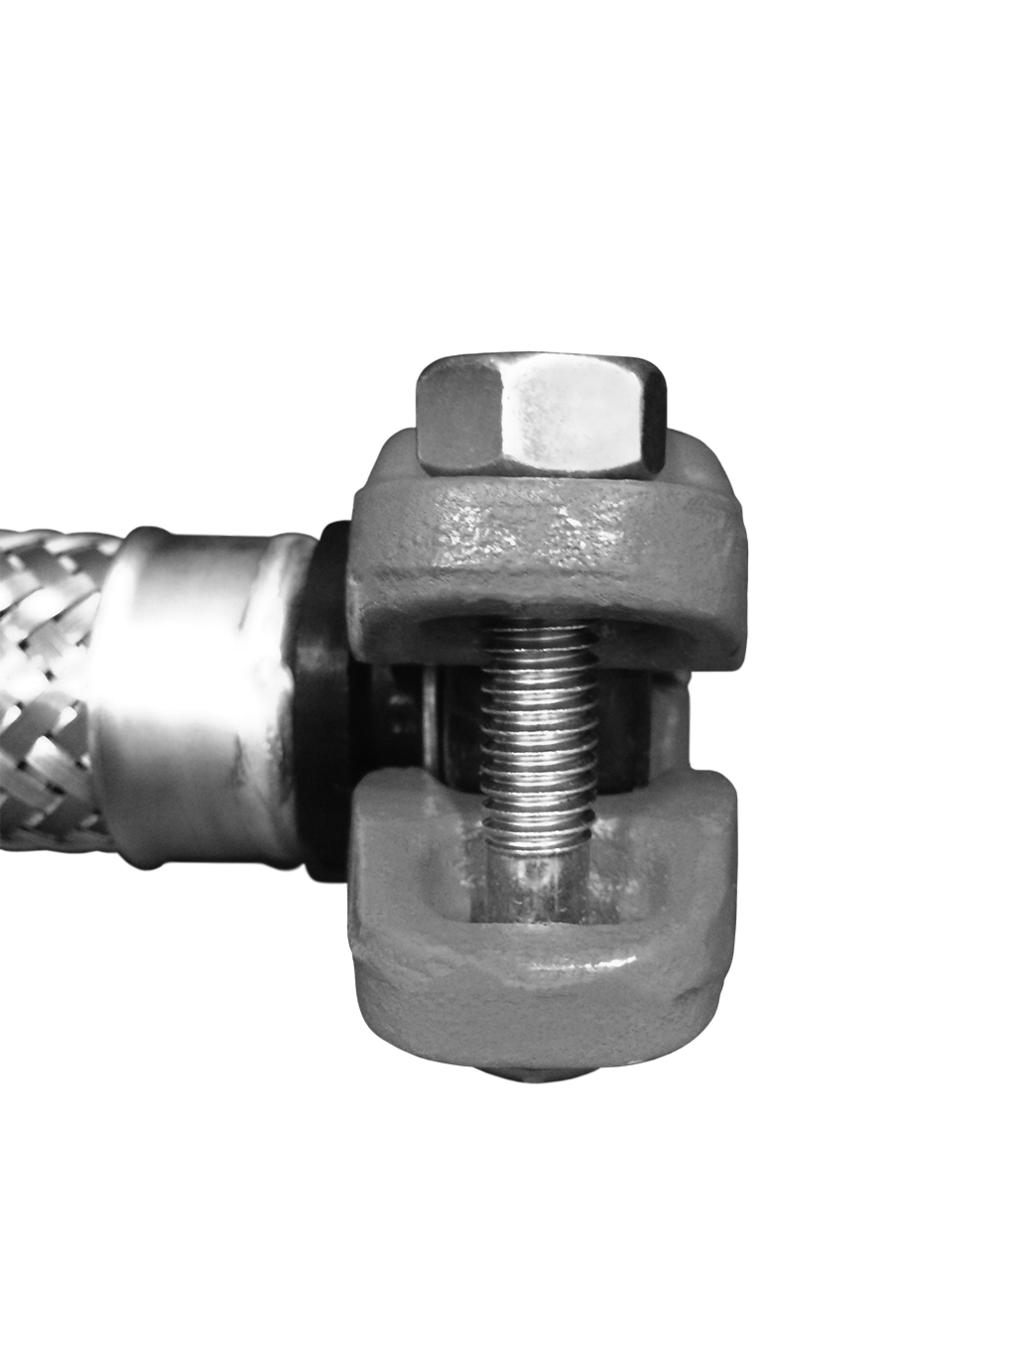 1-INCH/DN5 IGS CONNECTION TO THE SPRINKLER PIPING USING A SERIES AH1-CC OR SERIES AH-CC FLEXIBLE HOSE CORRECT - IGS Groove Profile INCORRECT - Orignal Groove System (OGS) Groove Profile Pipe and